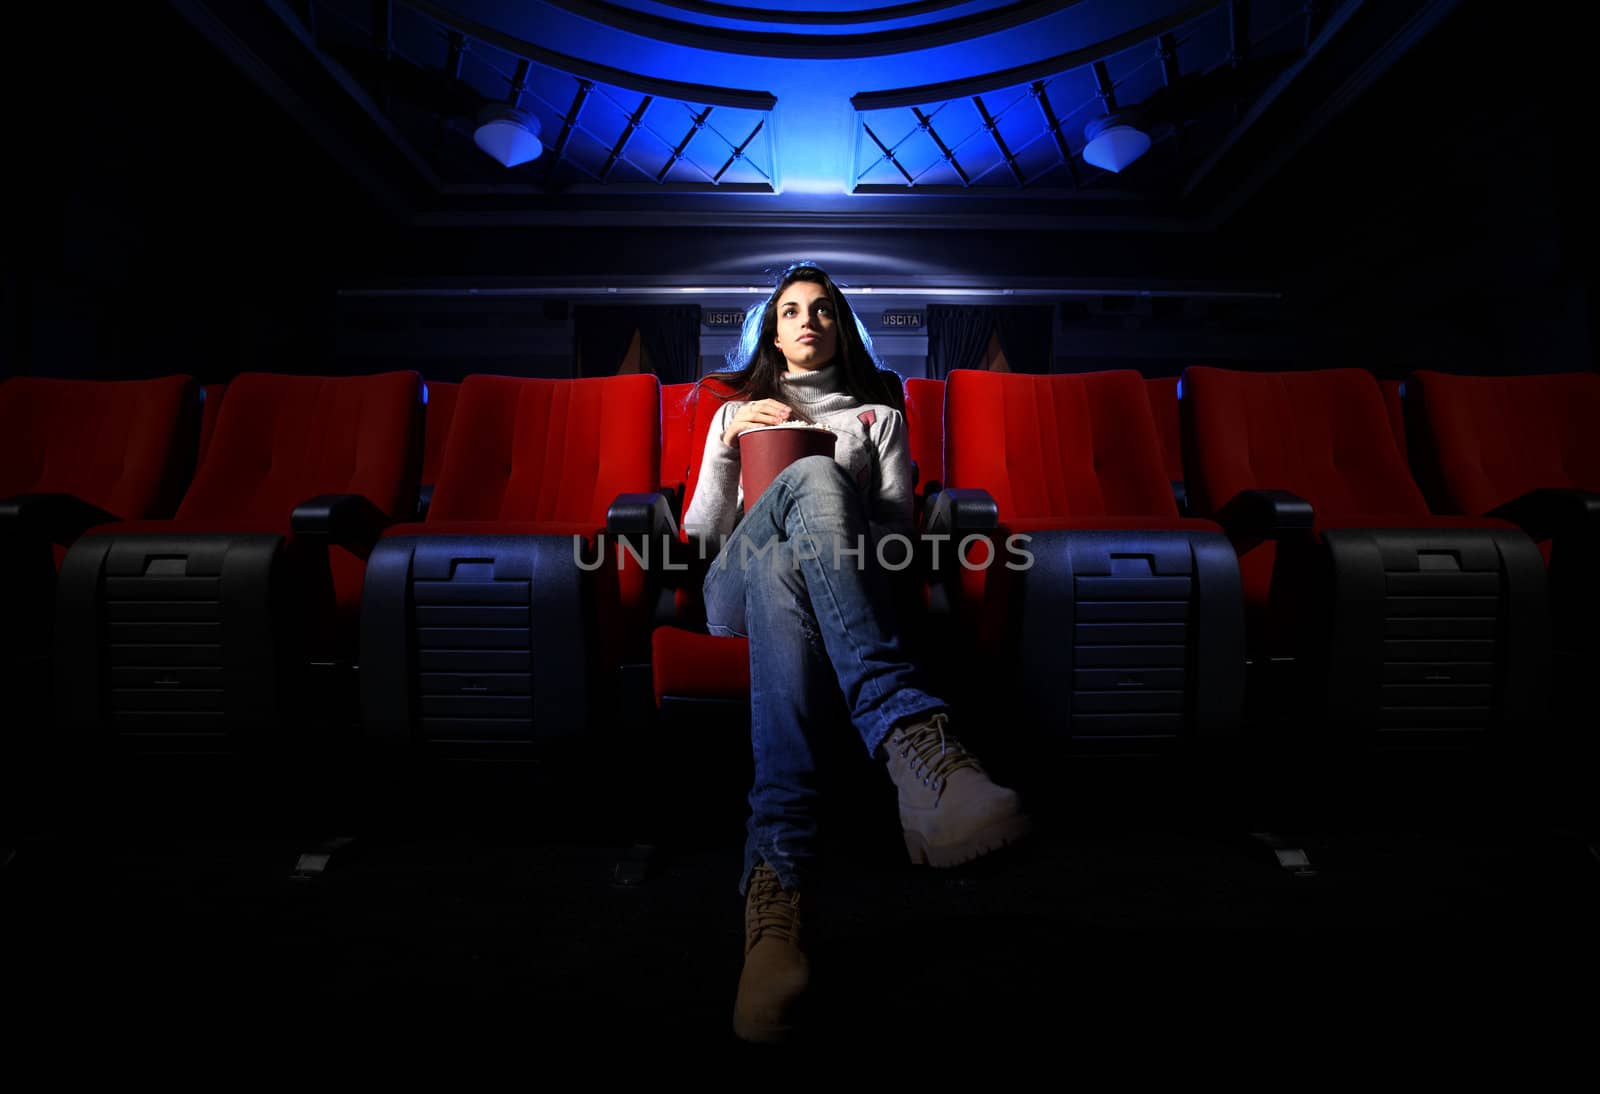 a pretty young woman is sitting alone in an empty theater, waiting for the movie